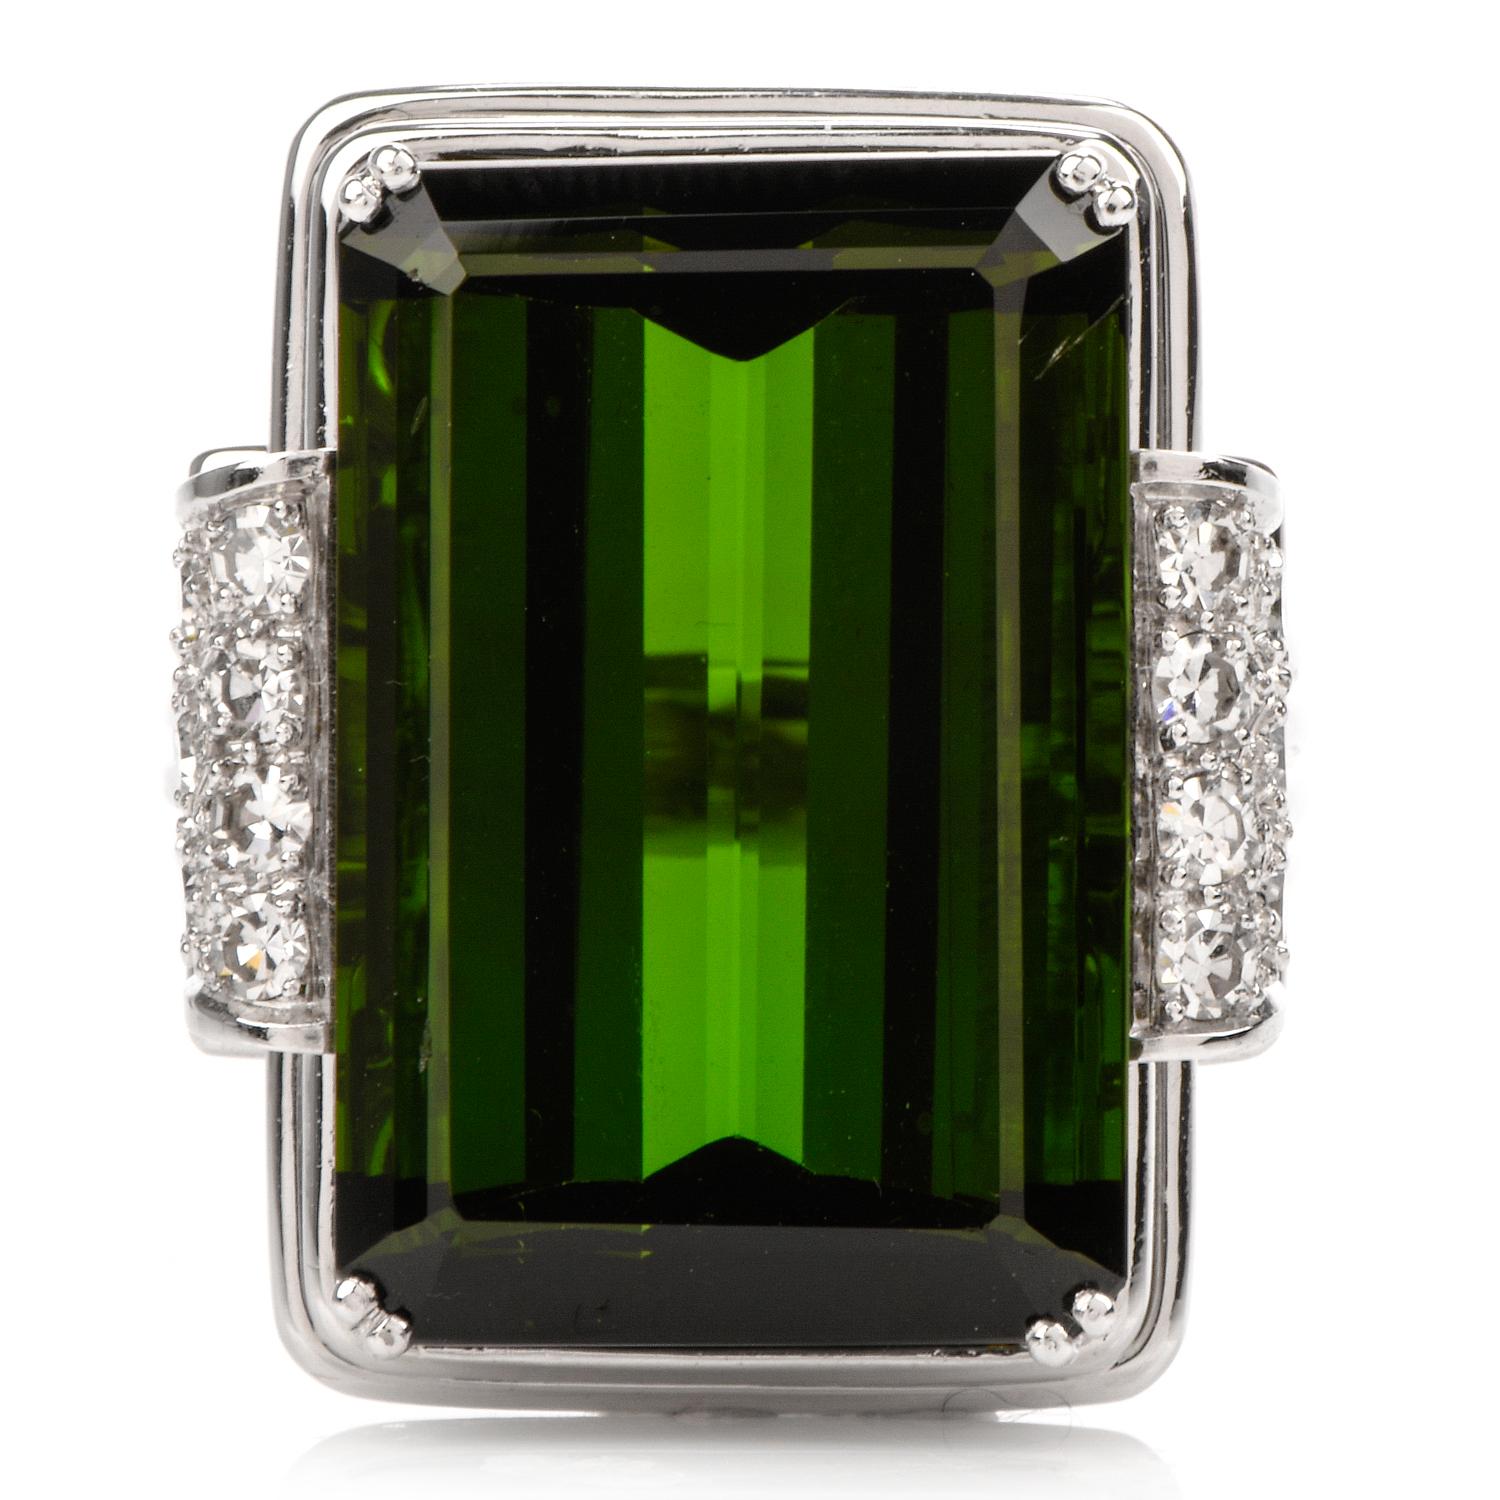 This classy tourmaline and diamond statement ring is crafted in solid 18-karat white gold, weighing 14 grams and measuring 22mm x 8mm high. Displaying a prominent prong-set, rectangular tourmaline of deep green color, weighing approximately 17.47